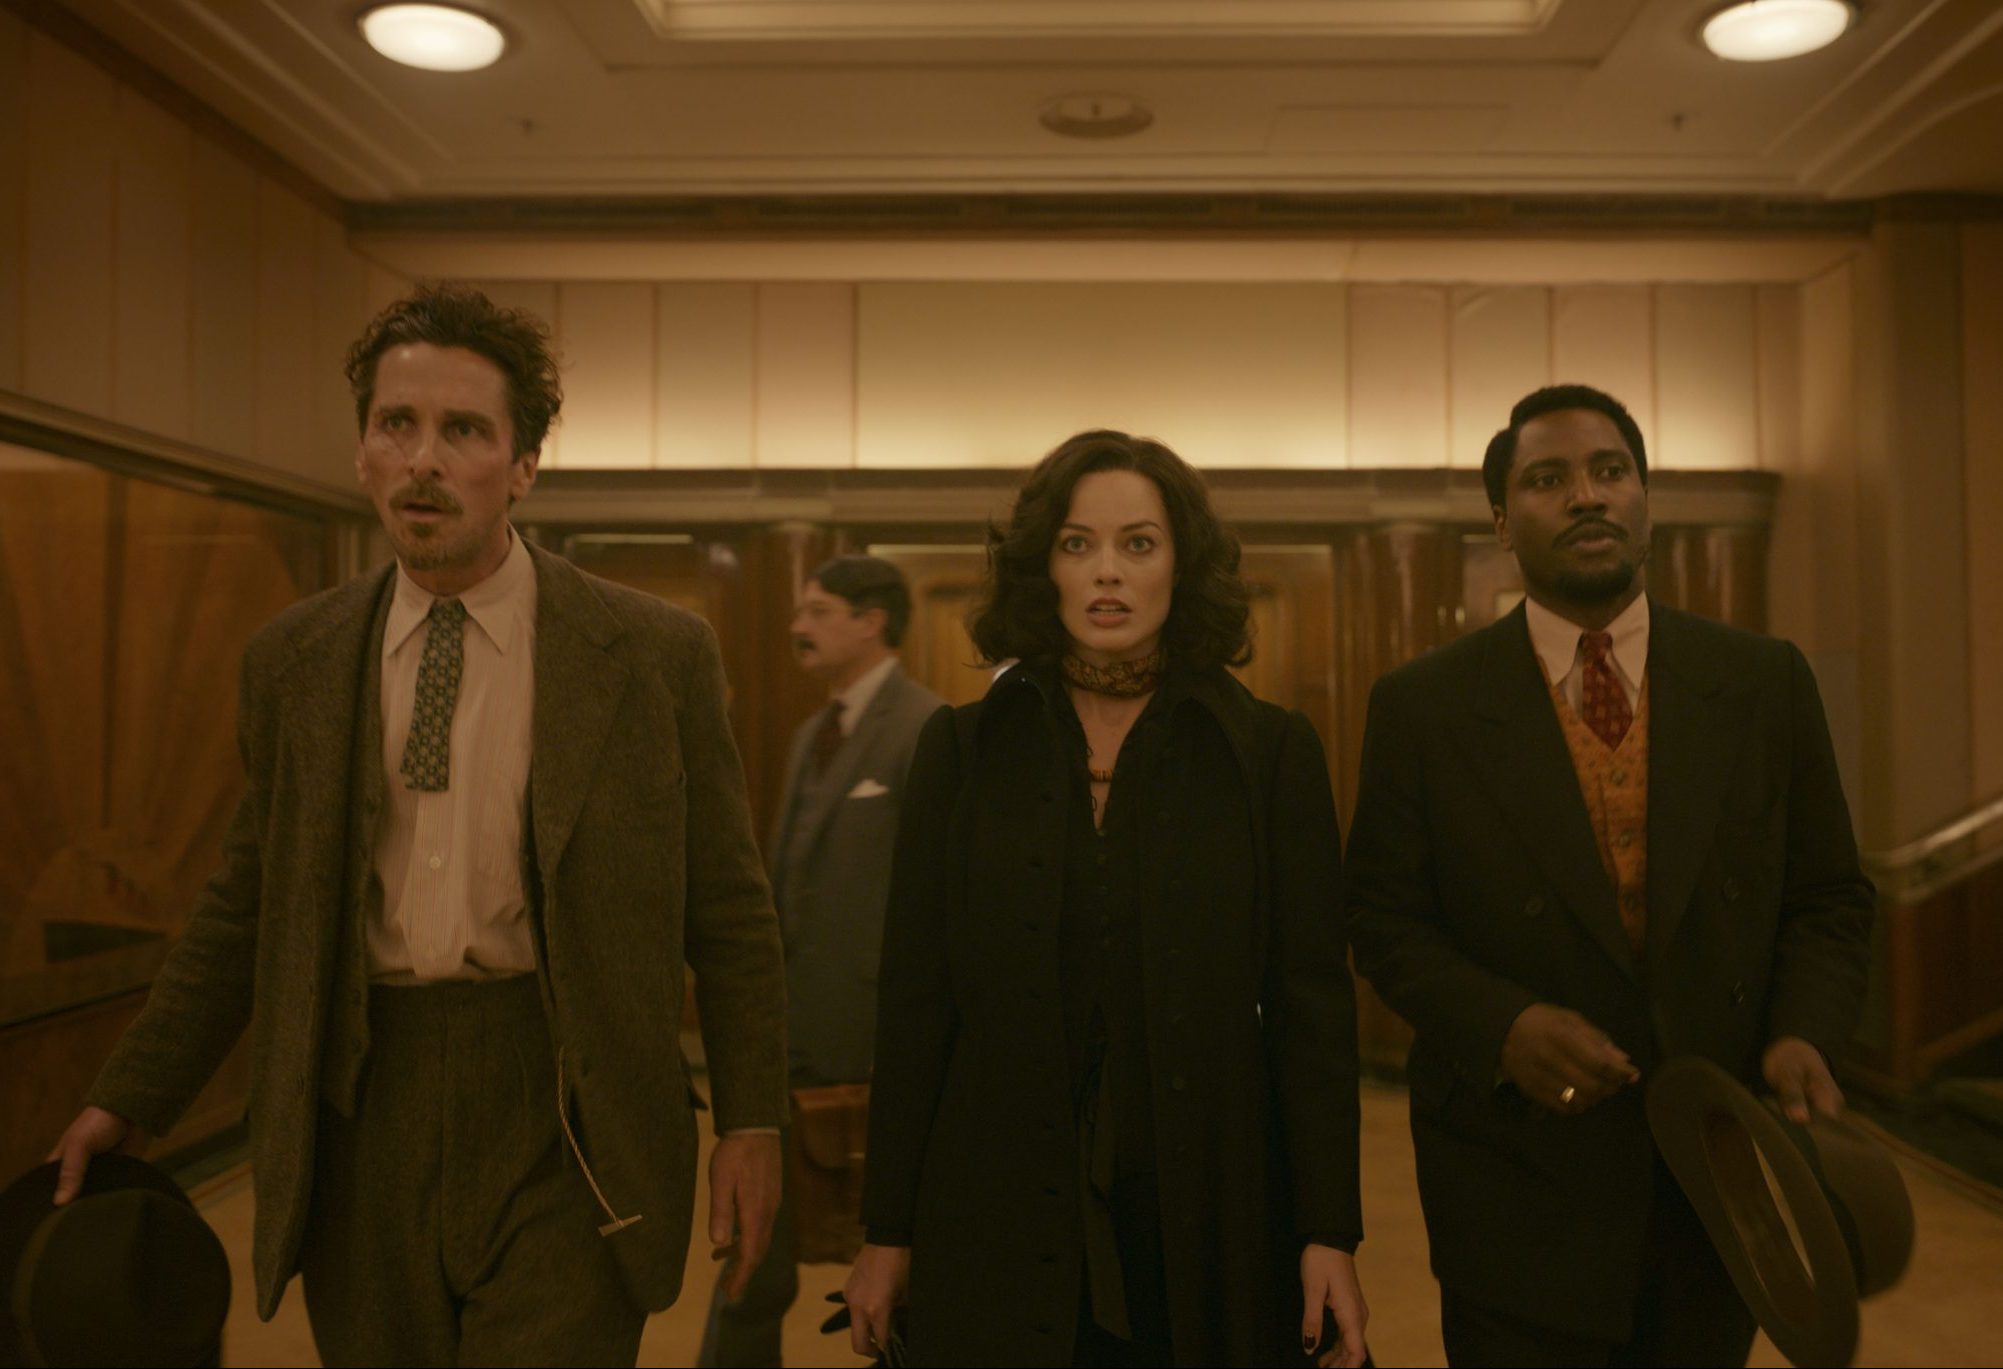 The first trailer for David O. Russell’s Amsterdam catches stars in a national mystery